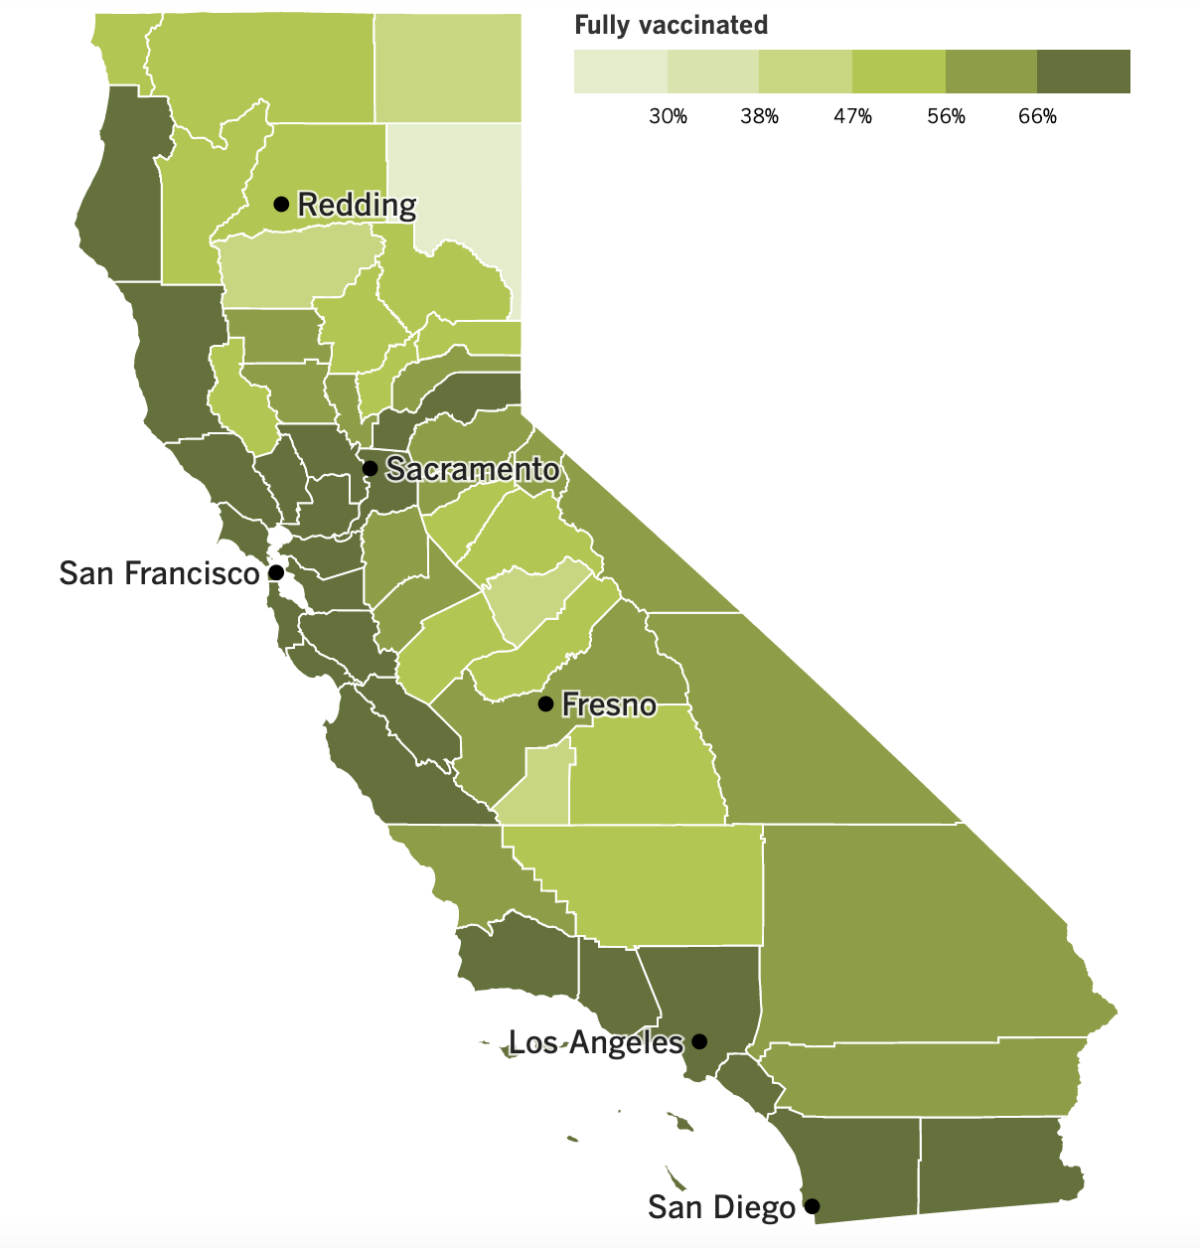 A map showing California's COVID-19 vaccination progress by county as of July 12, 2022.